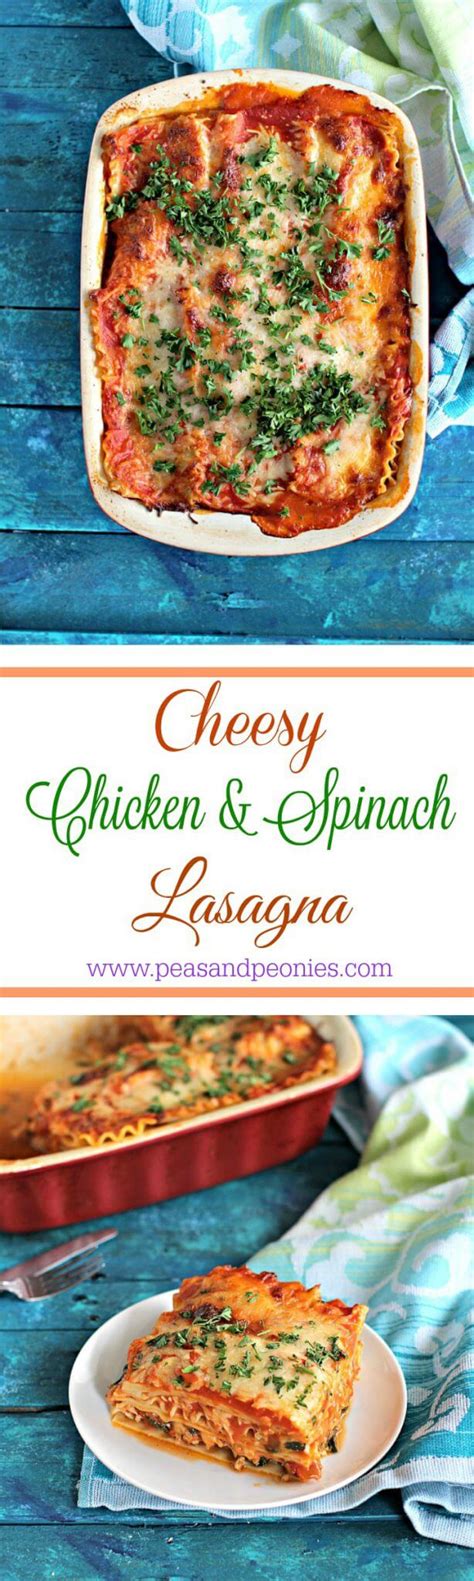 best-chicken-spinach-lasagna-sweet-and-savory-meals image